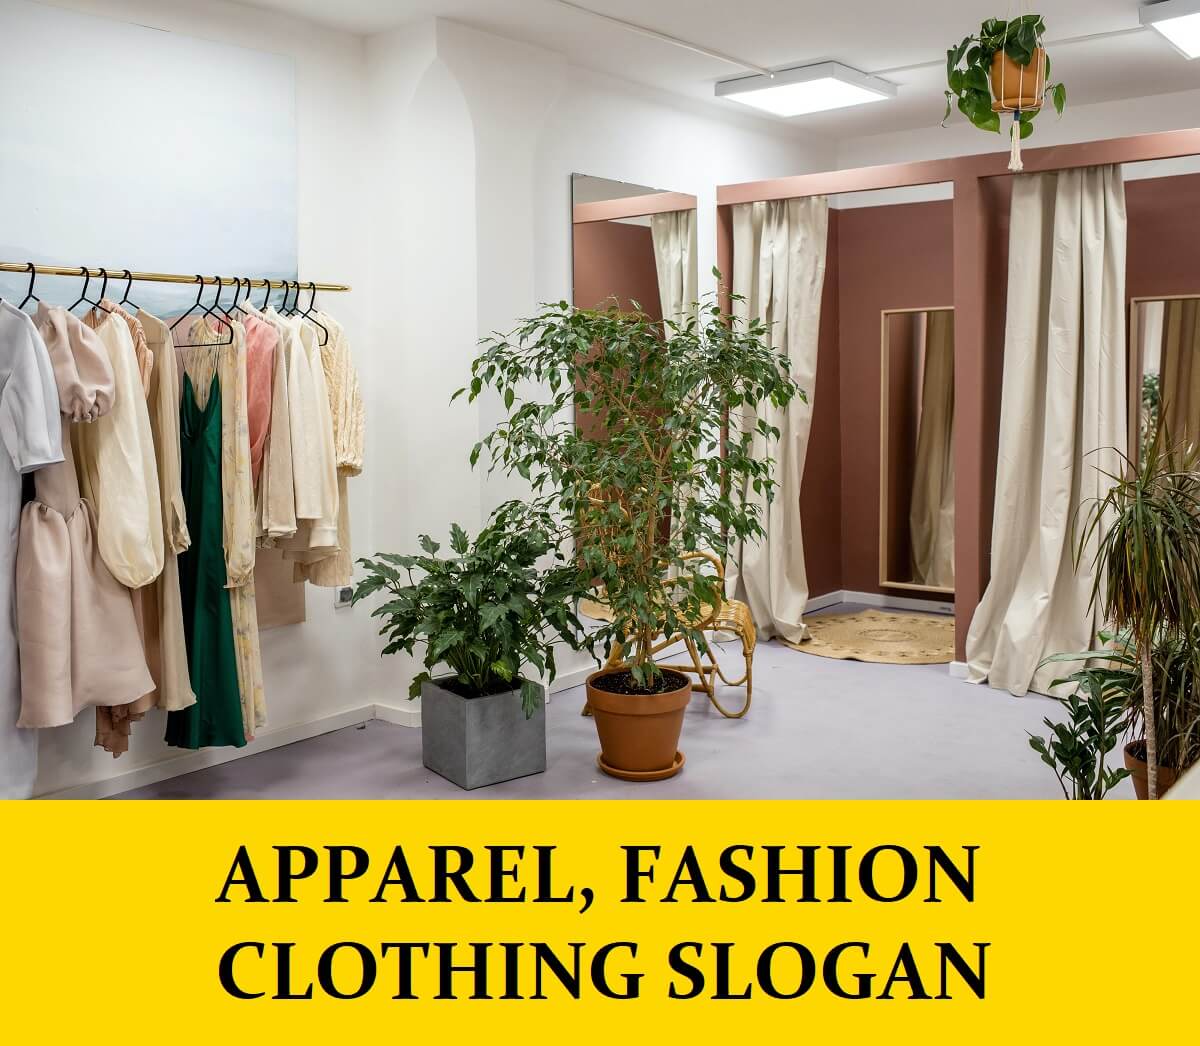 Slogans for Apparel, Fashion, and Clothing Business